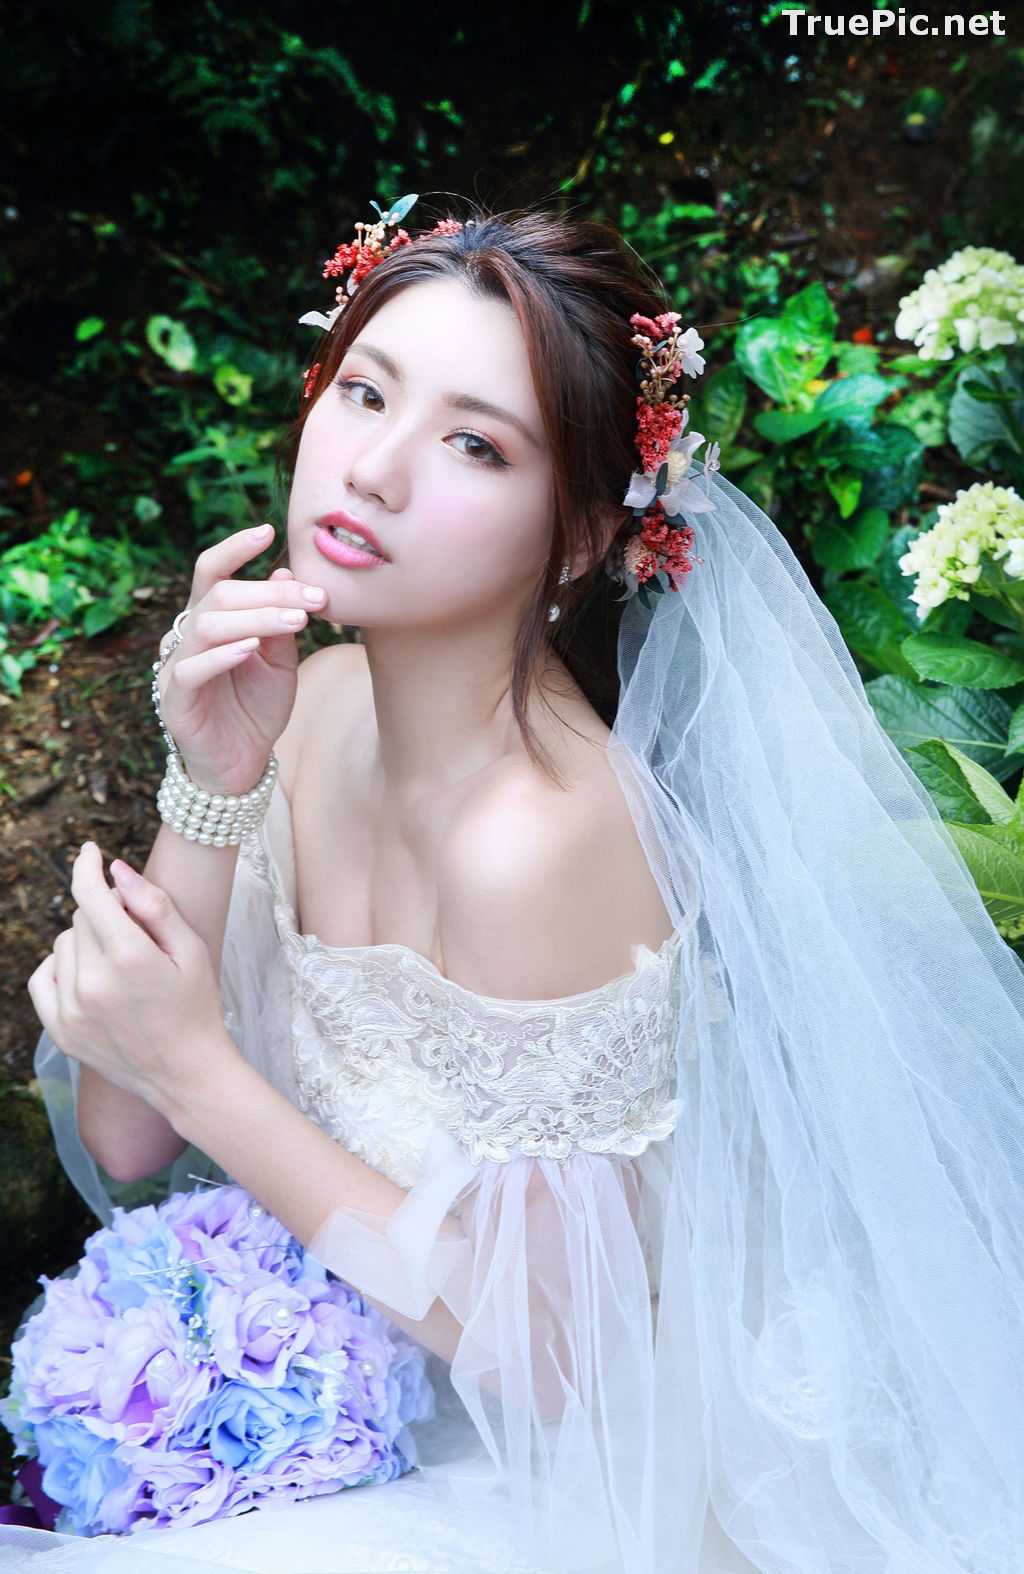 Image Taiwanese Model - 張倫甄 - Beautiful Bride and Hydrangea Flowers - TruePic.net - Picture-41